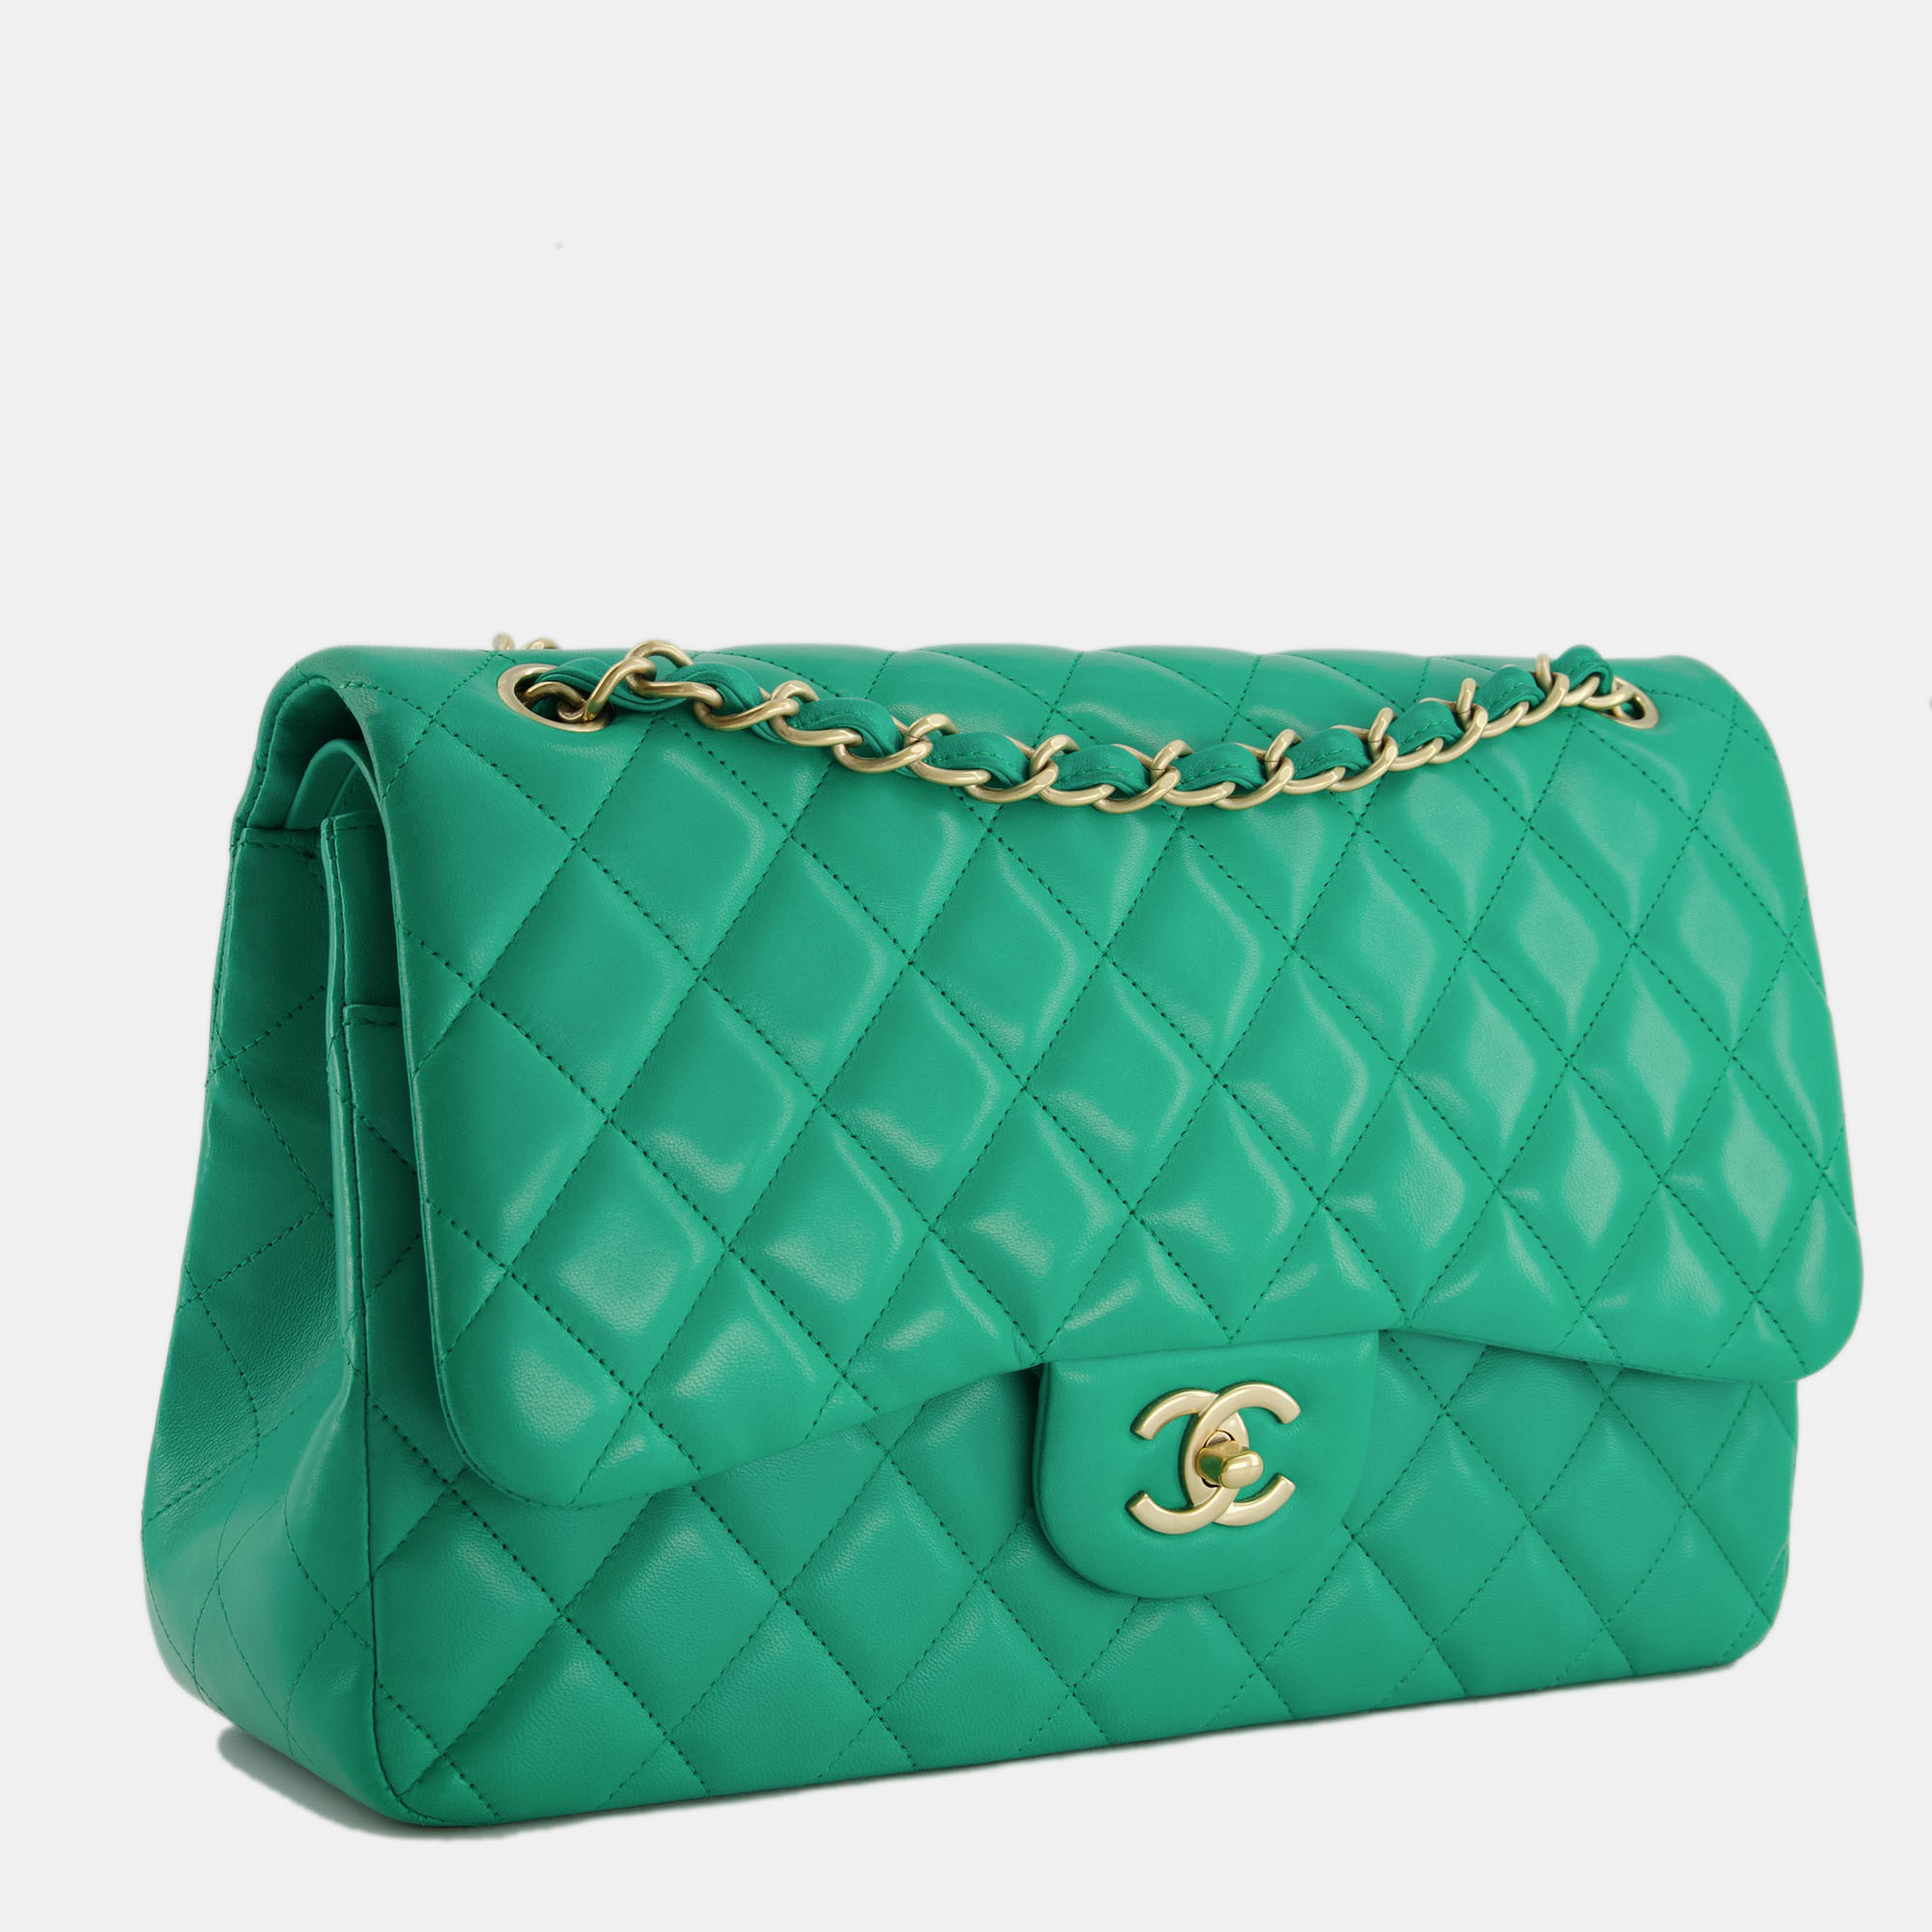 Chanel Emerald Green Jumbo Classic Double Flap Bag In Lambskin Leather With Brushed Gold Hardware